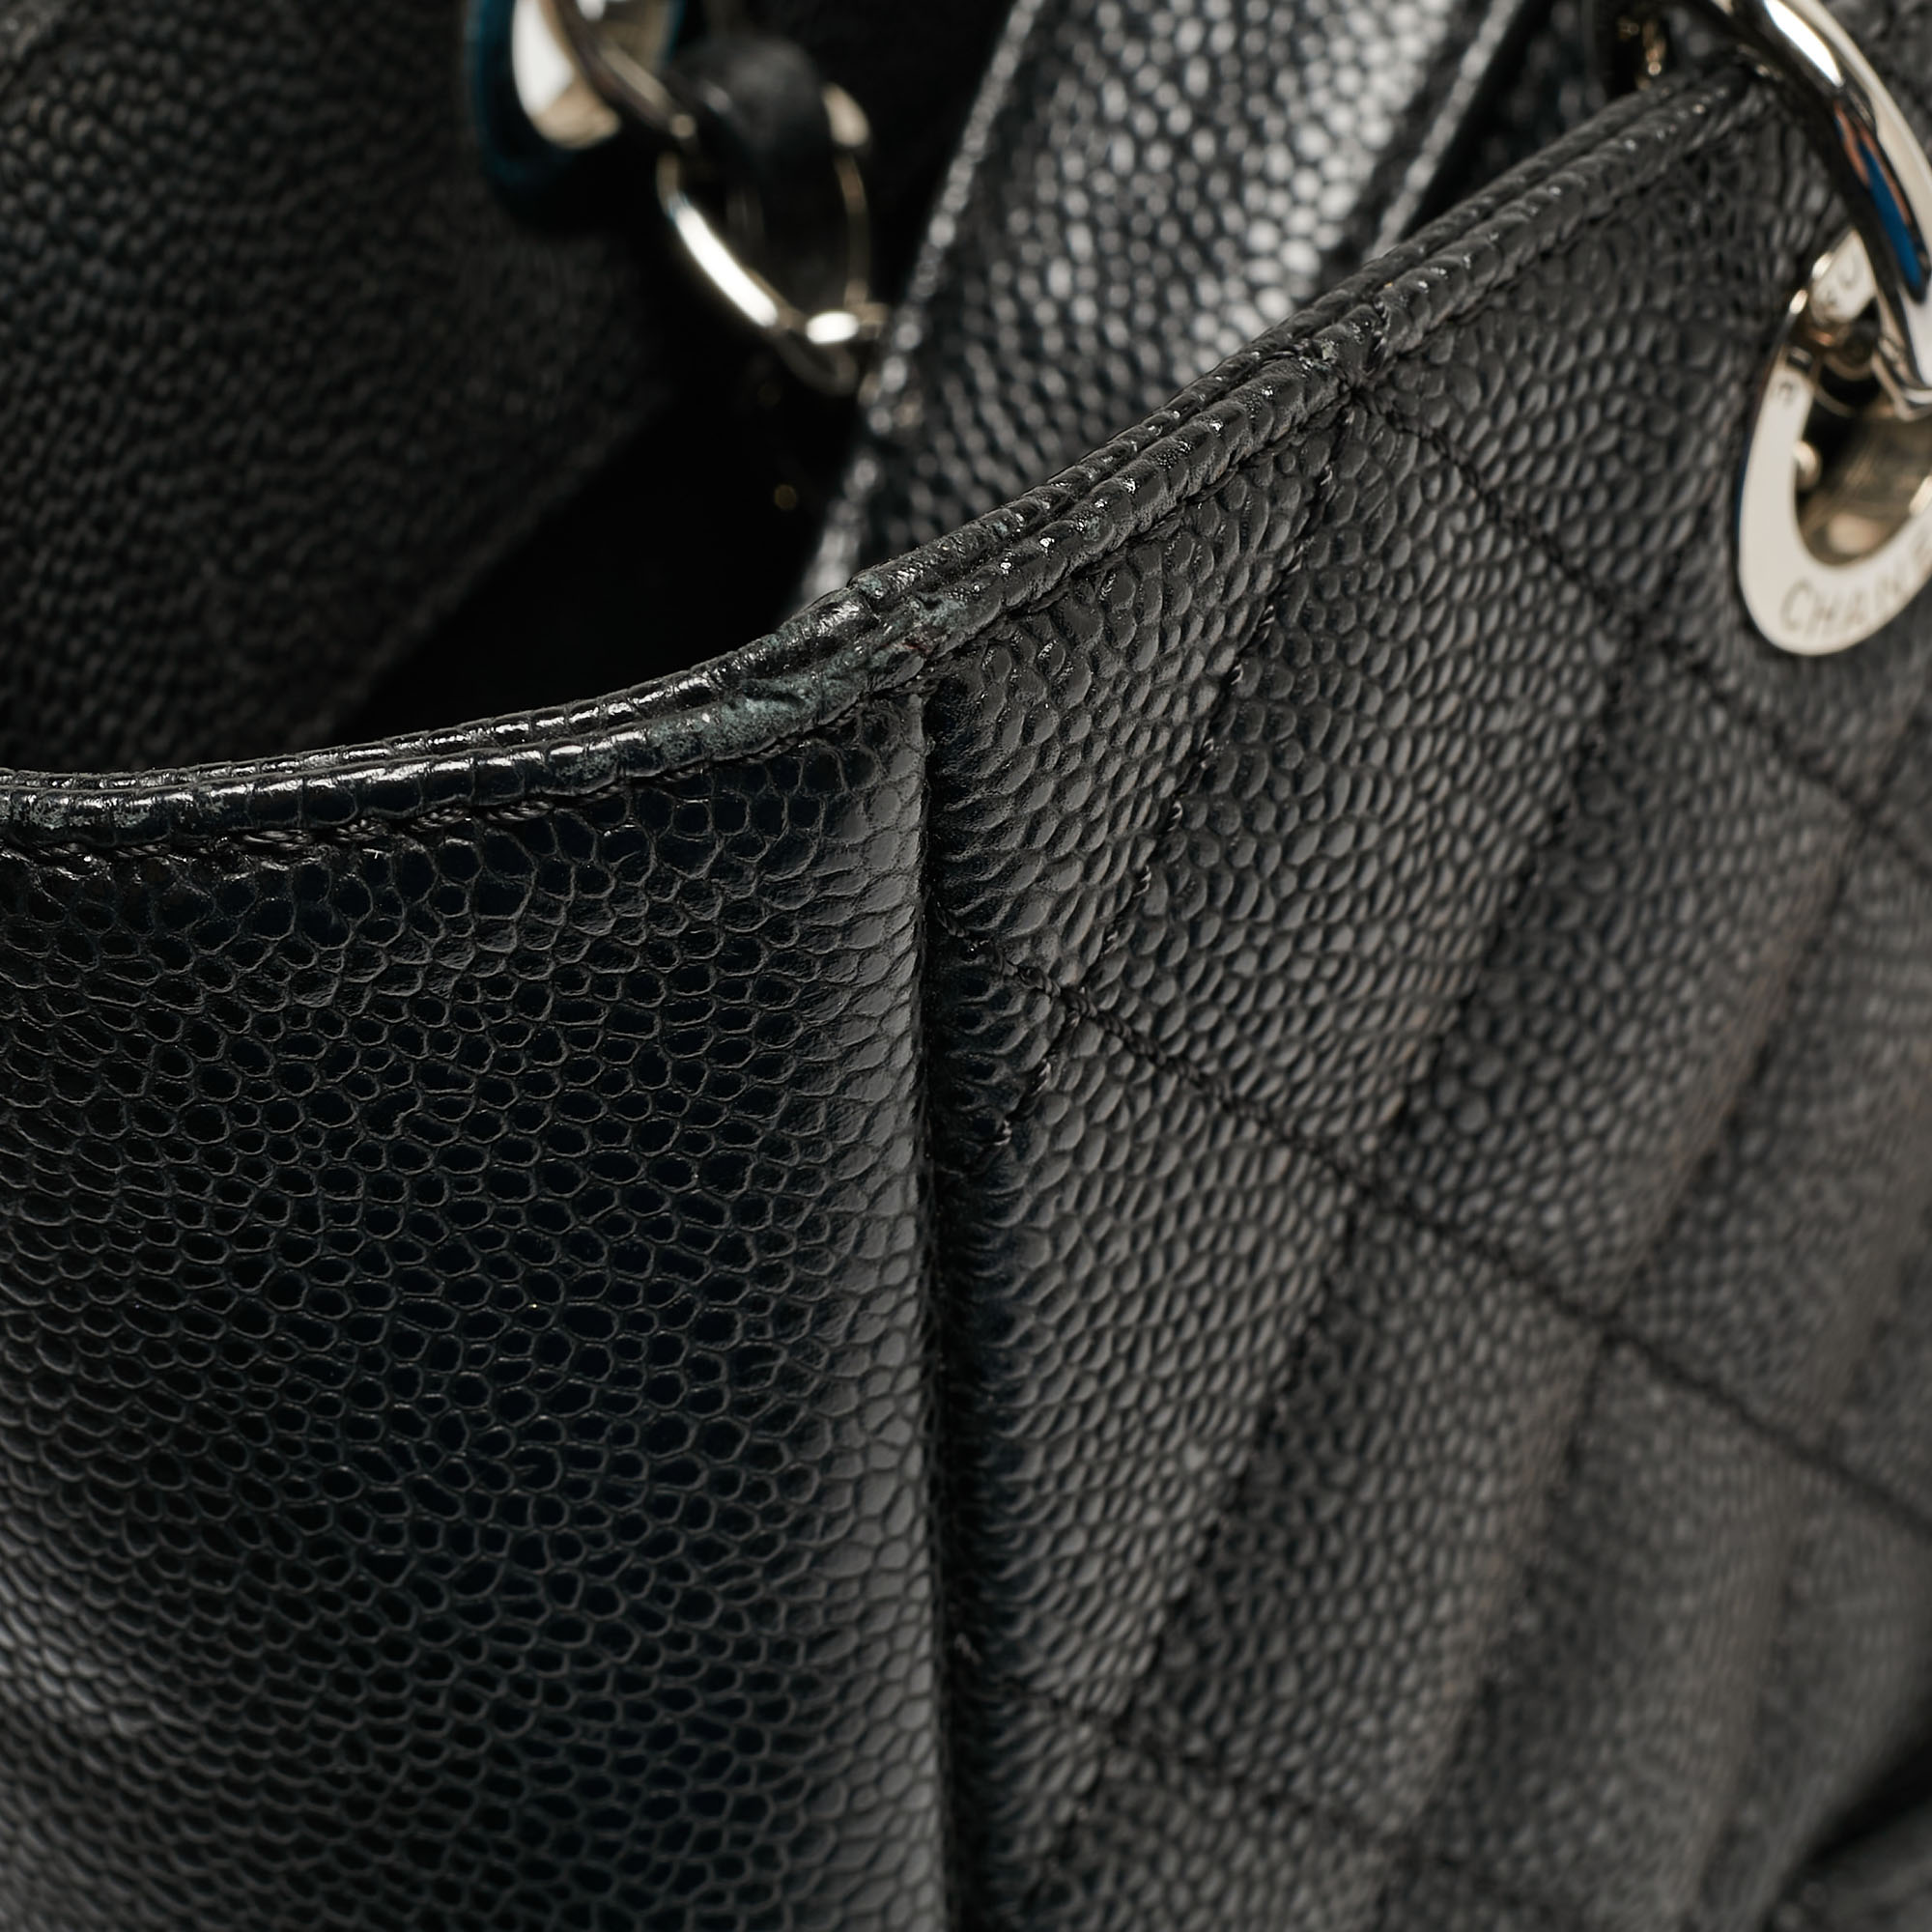 Chanel Black Caviar Quilted Leather CC Tote